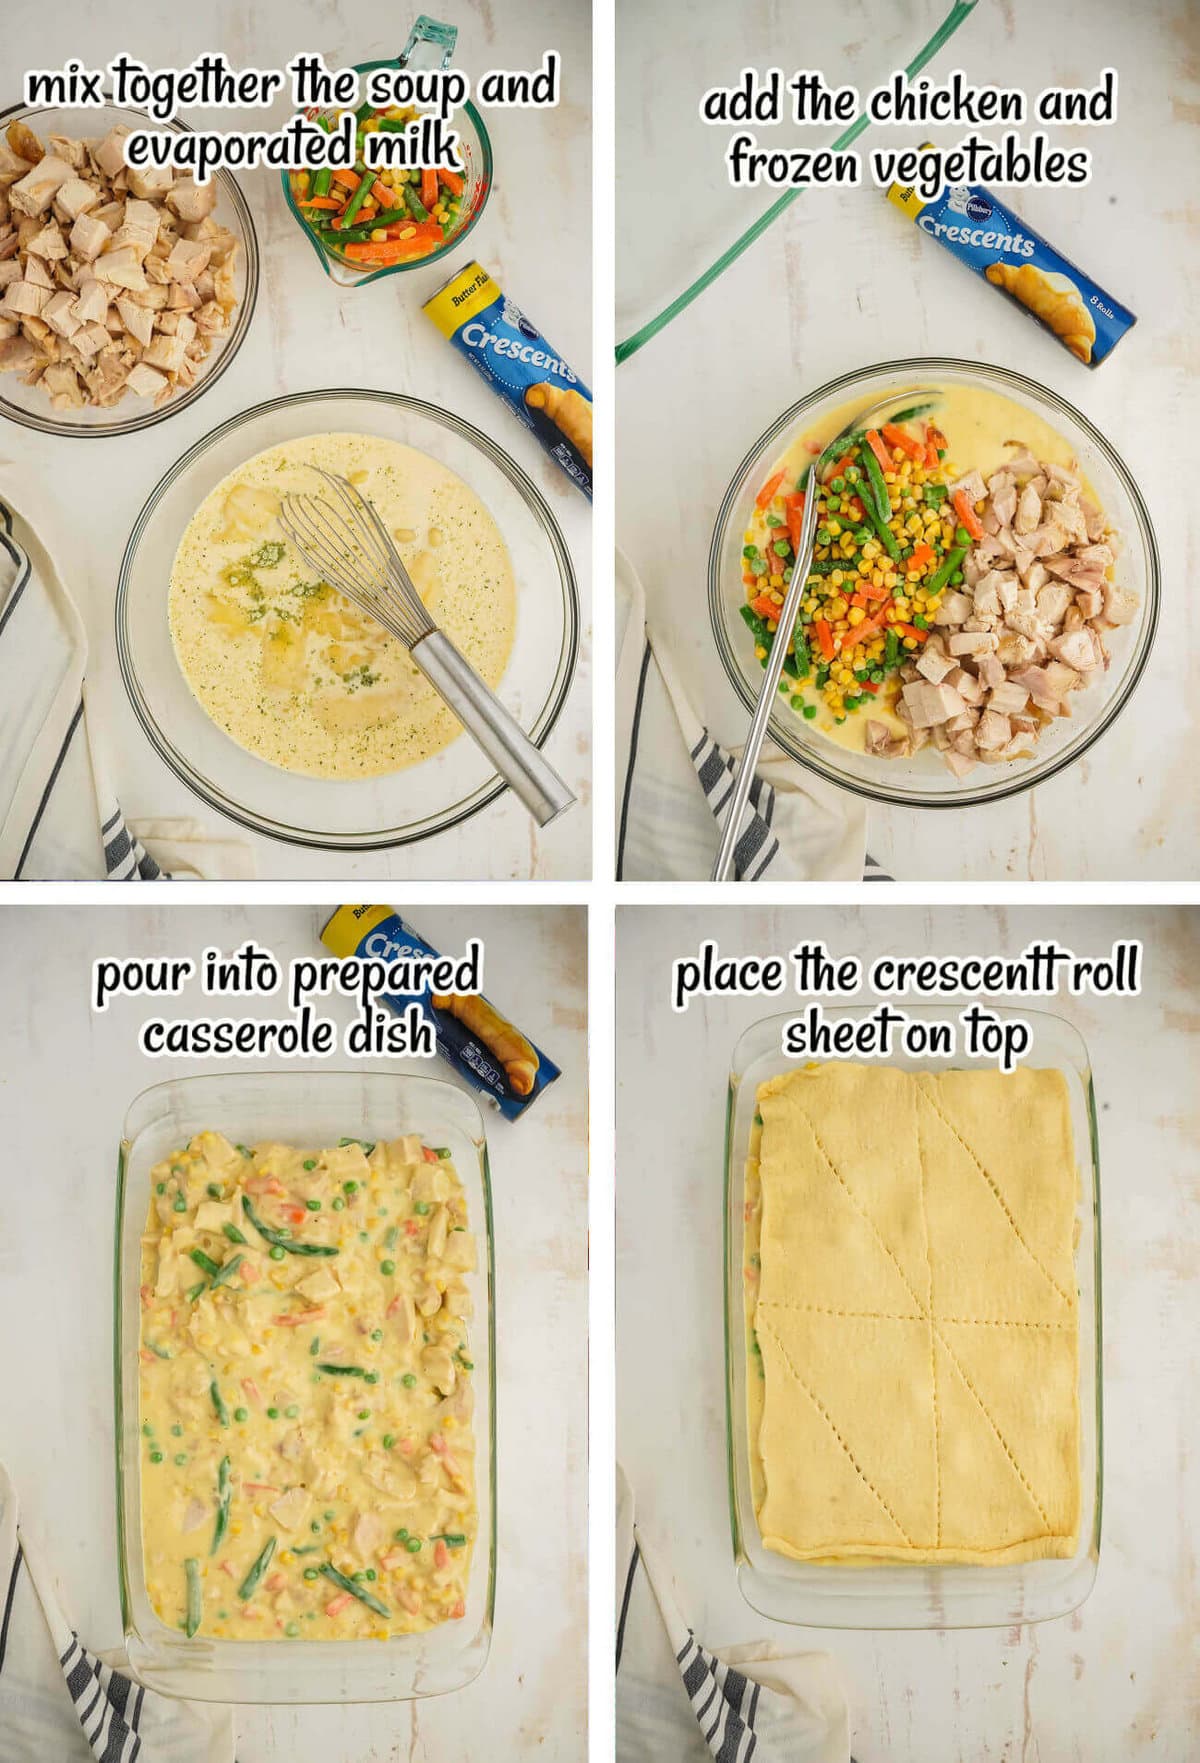 Photos showing step by step instructions to make this simple recipe. With print overlay.